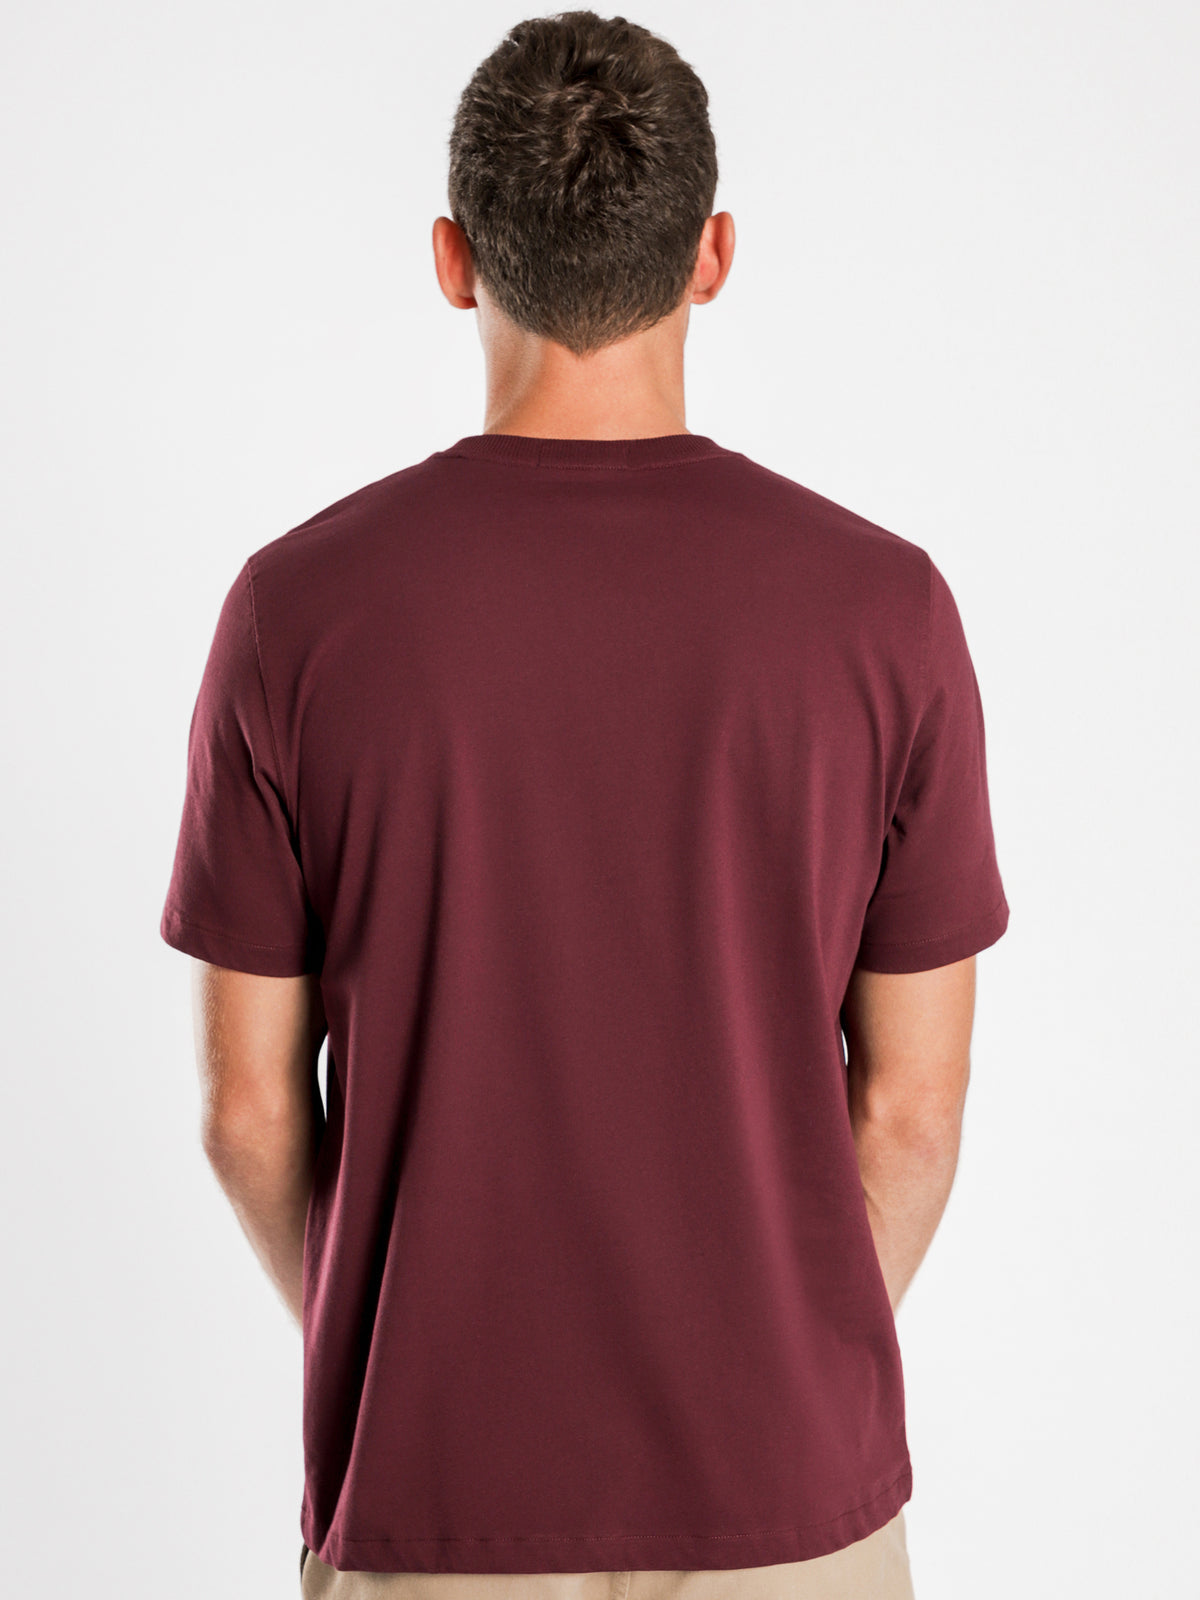 Embroidered Global Branded T-Shirt in Mahogany